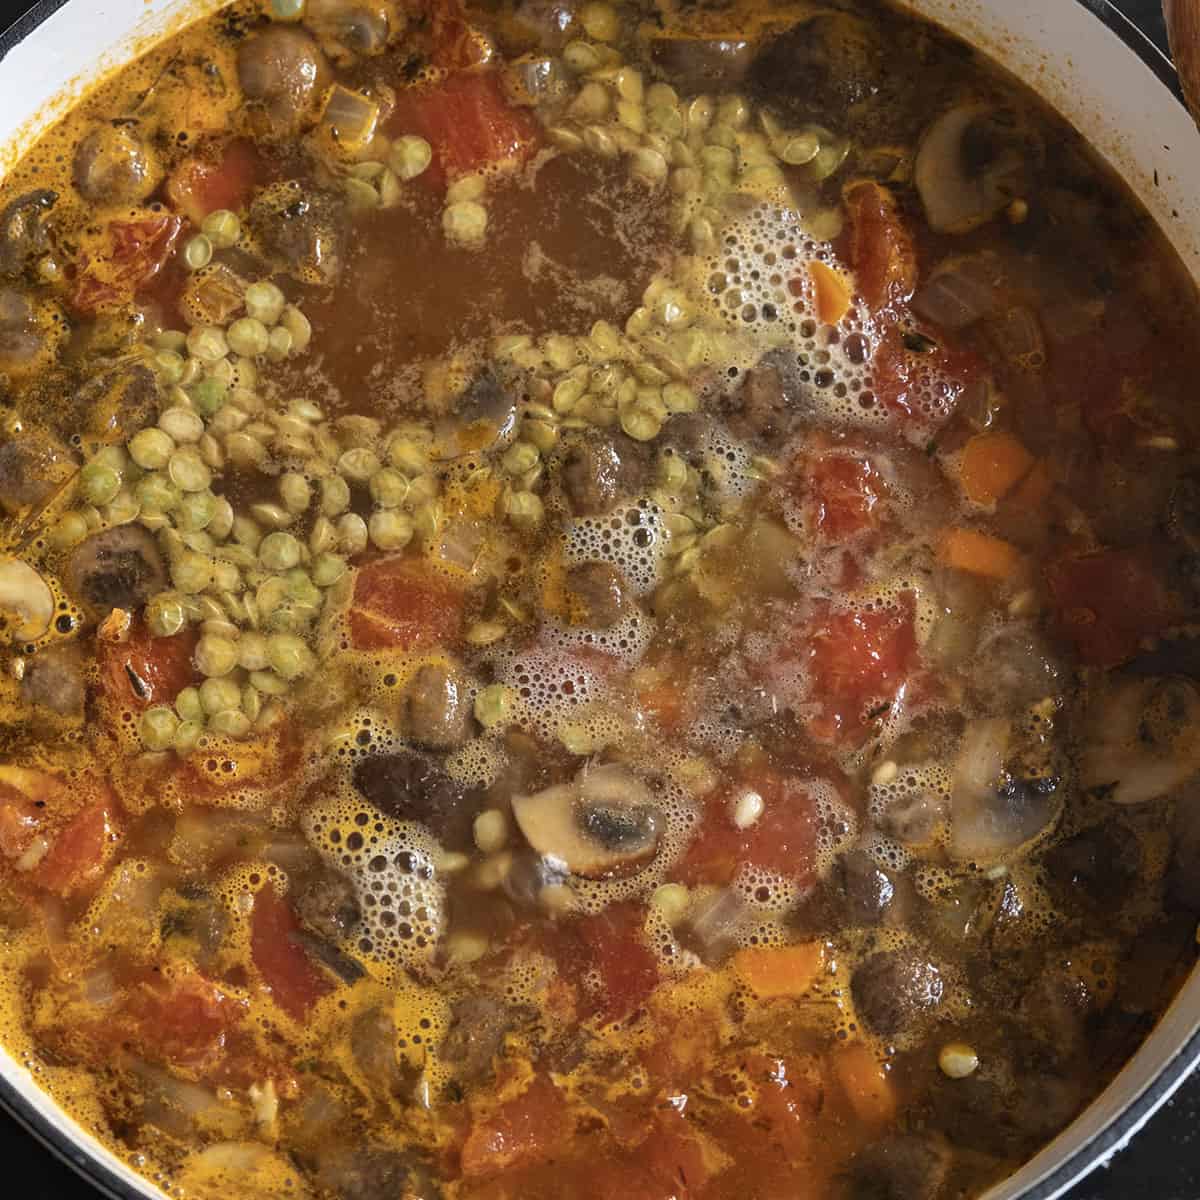 simmering the soup with lentils and barley